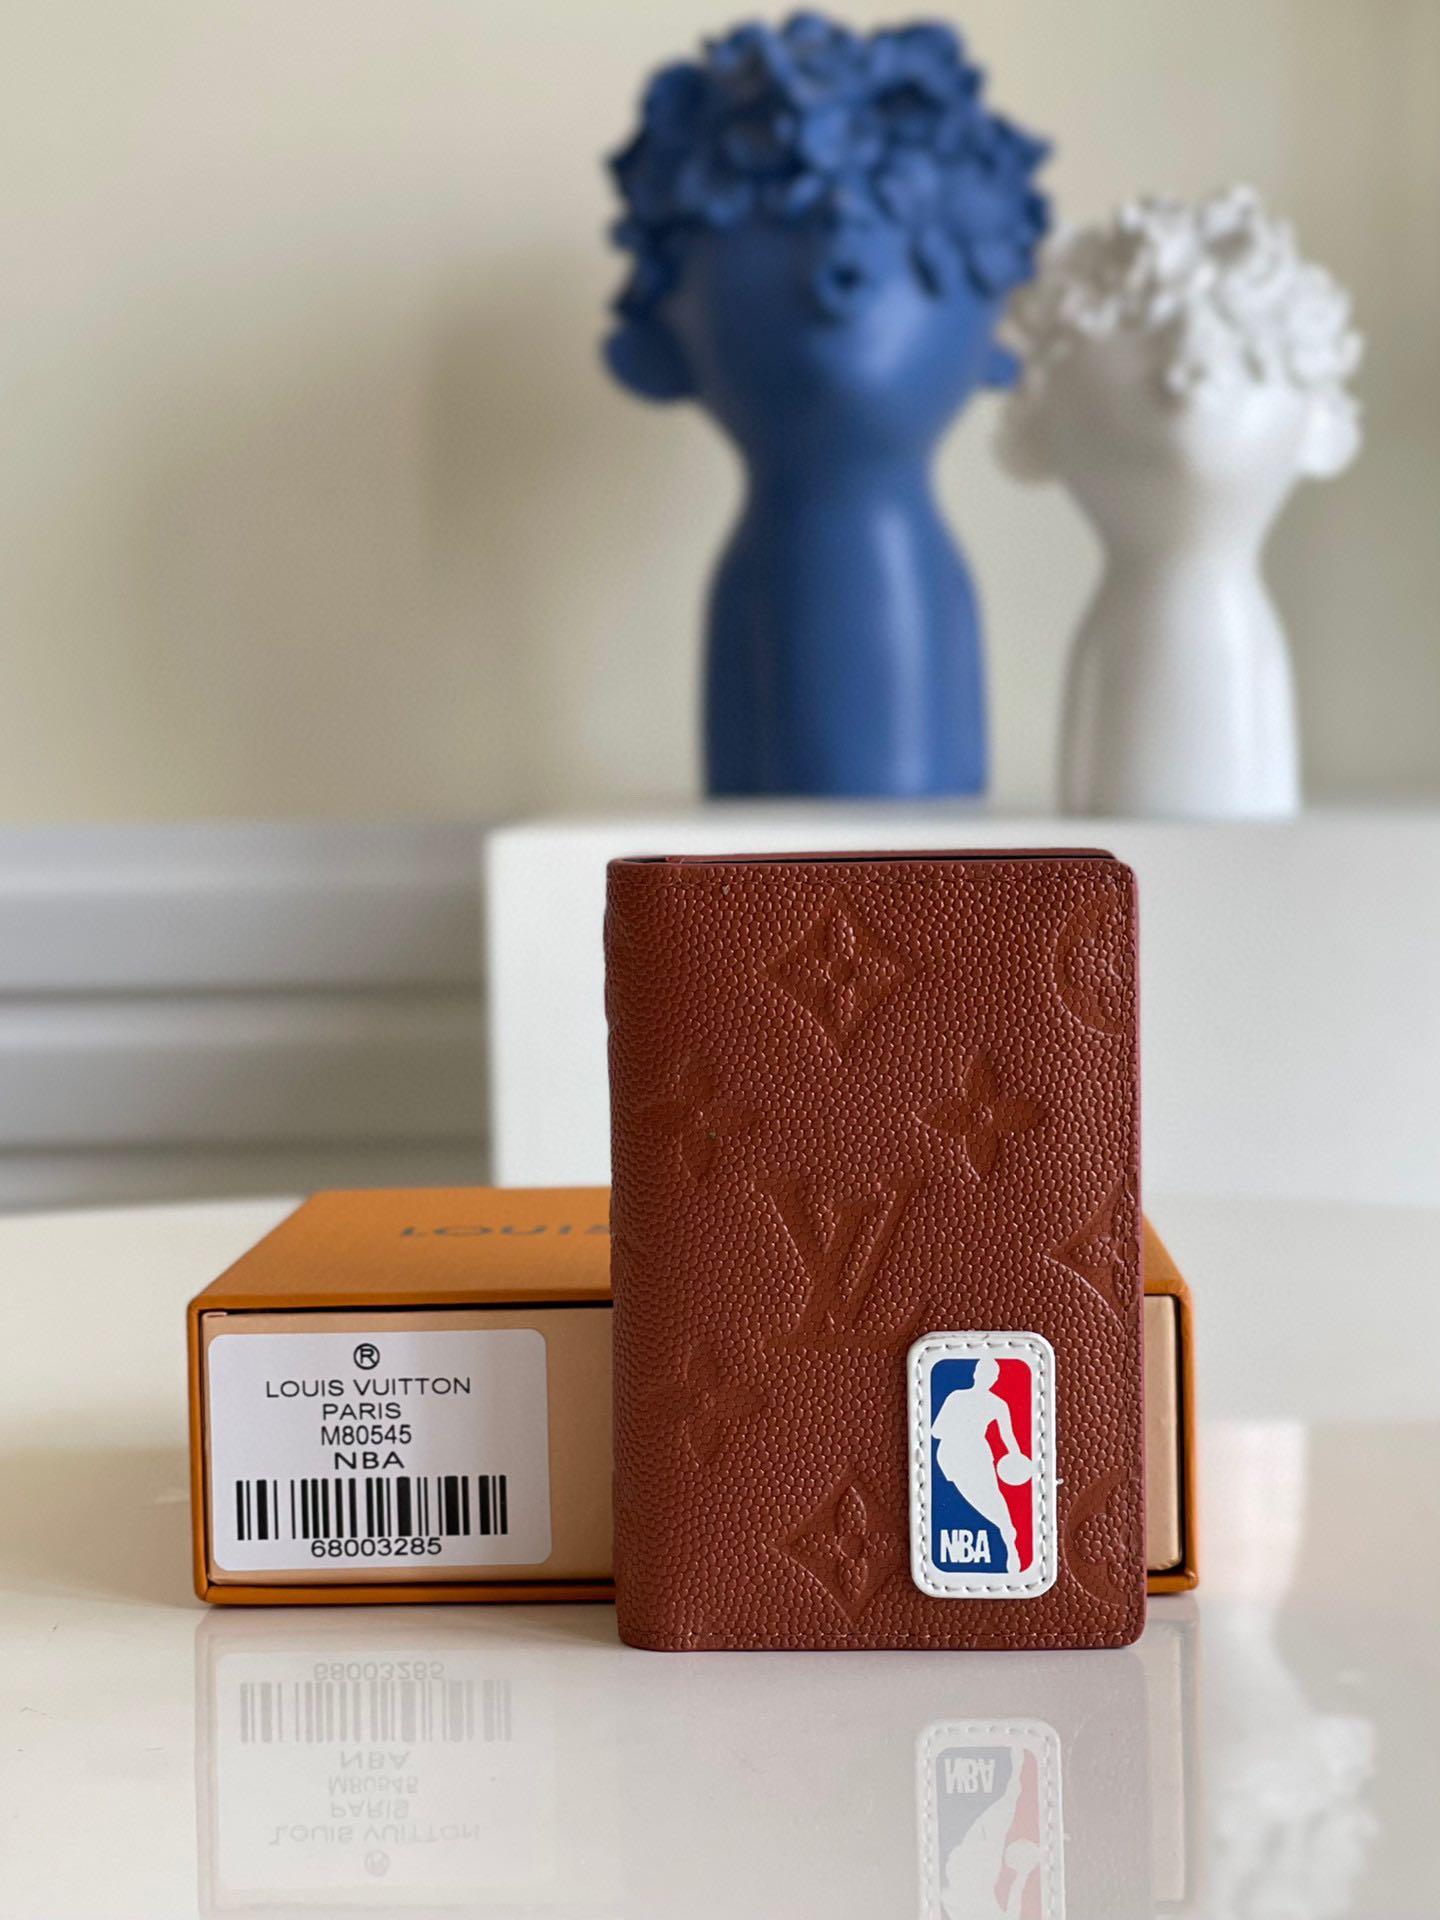 Lv x nba pocket organizer 🏀🏀🏀, Men's Fashion, Bags, Belt bags, Clutches  and Pouches on Carousell